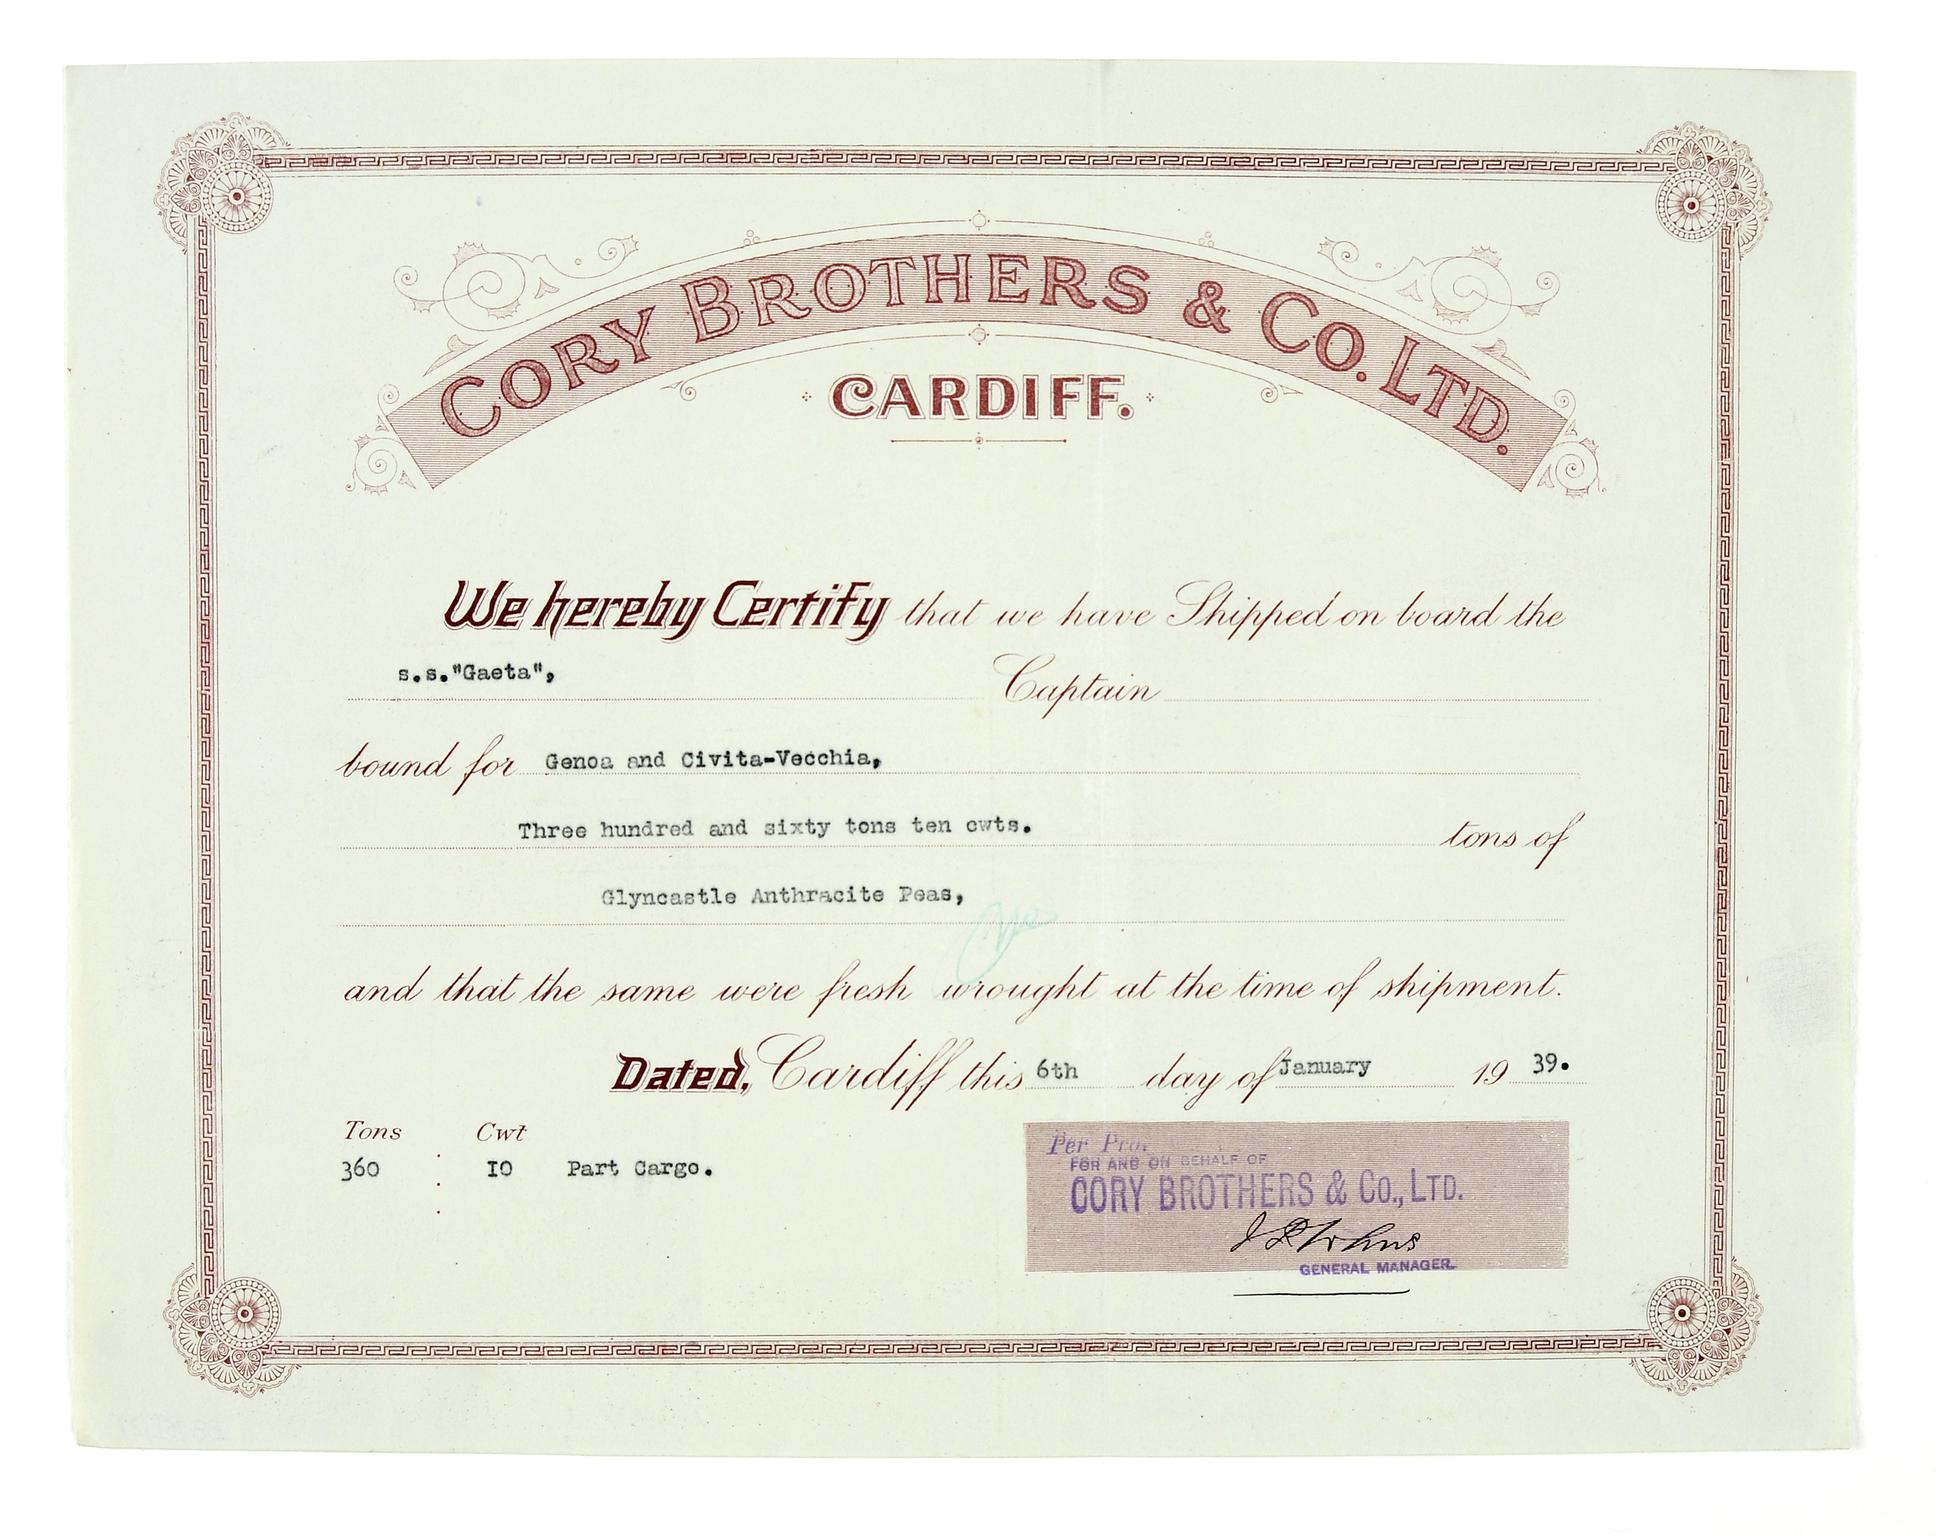 Cory Brothers & Co. Ltd., lading cert